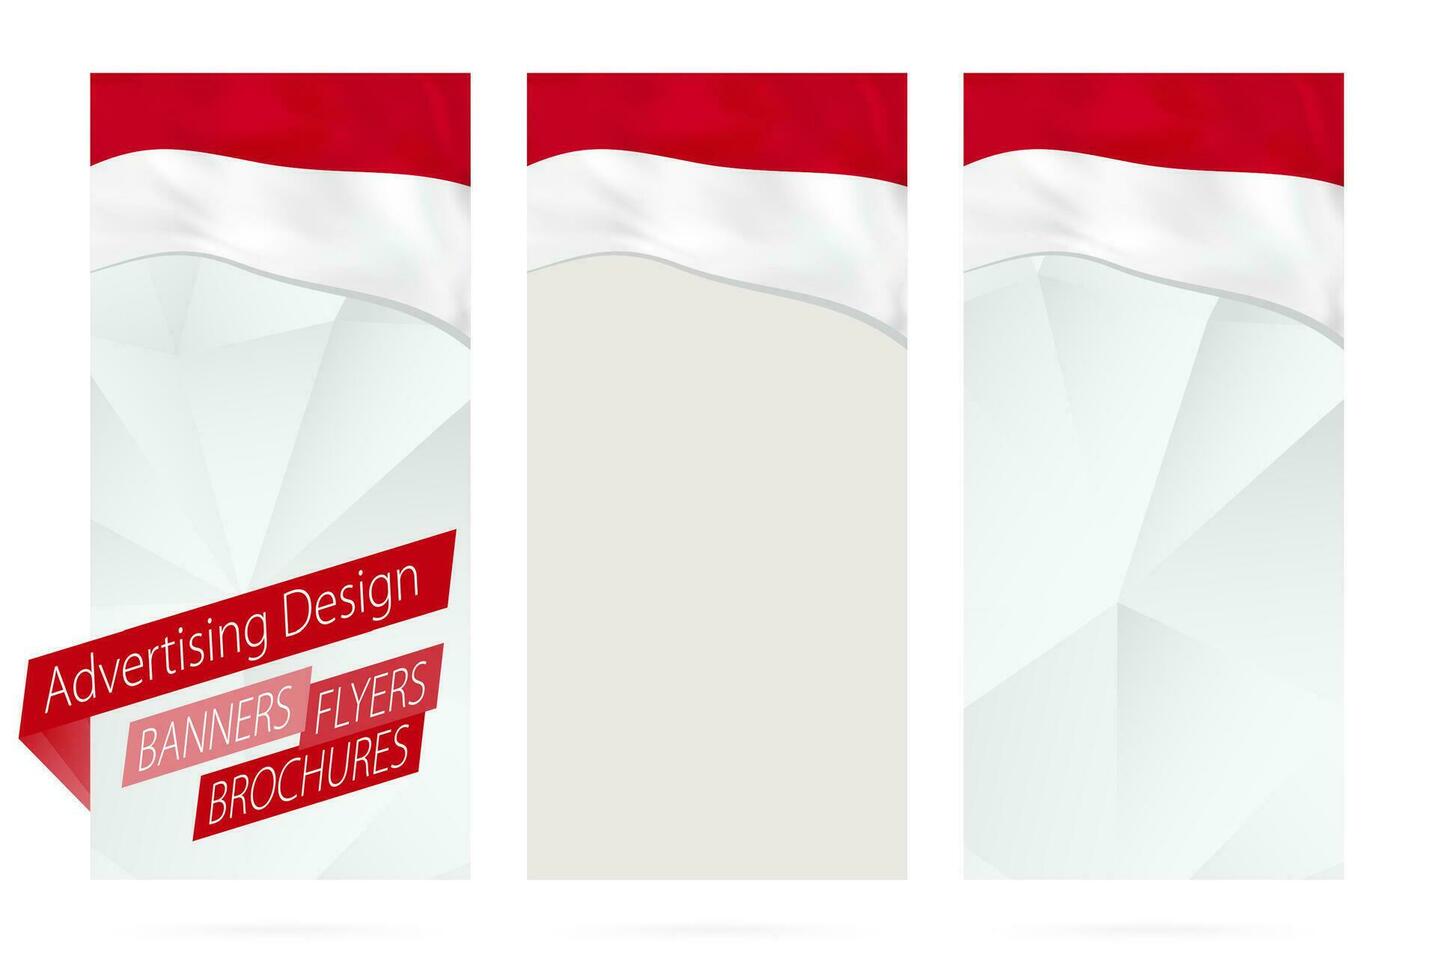 Design of banners, flyers, brochures with flag of Indonesia. vector